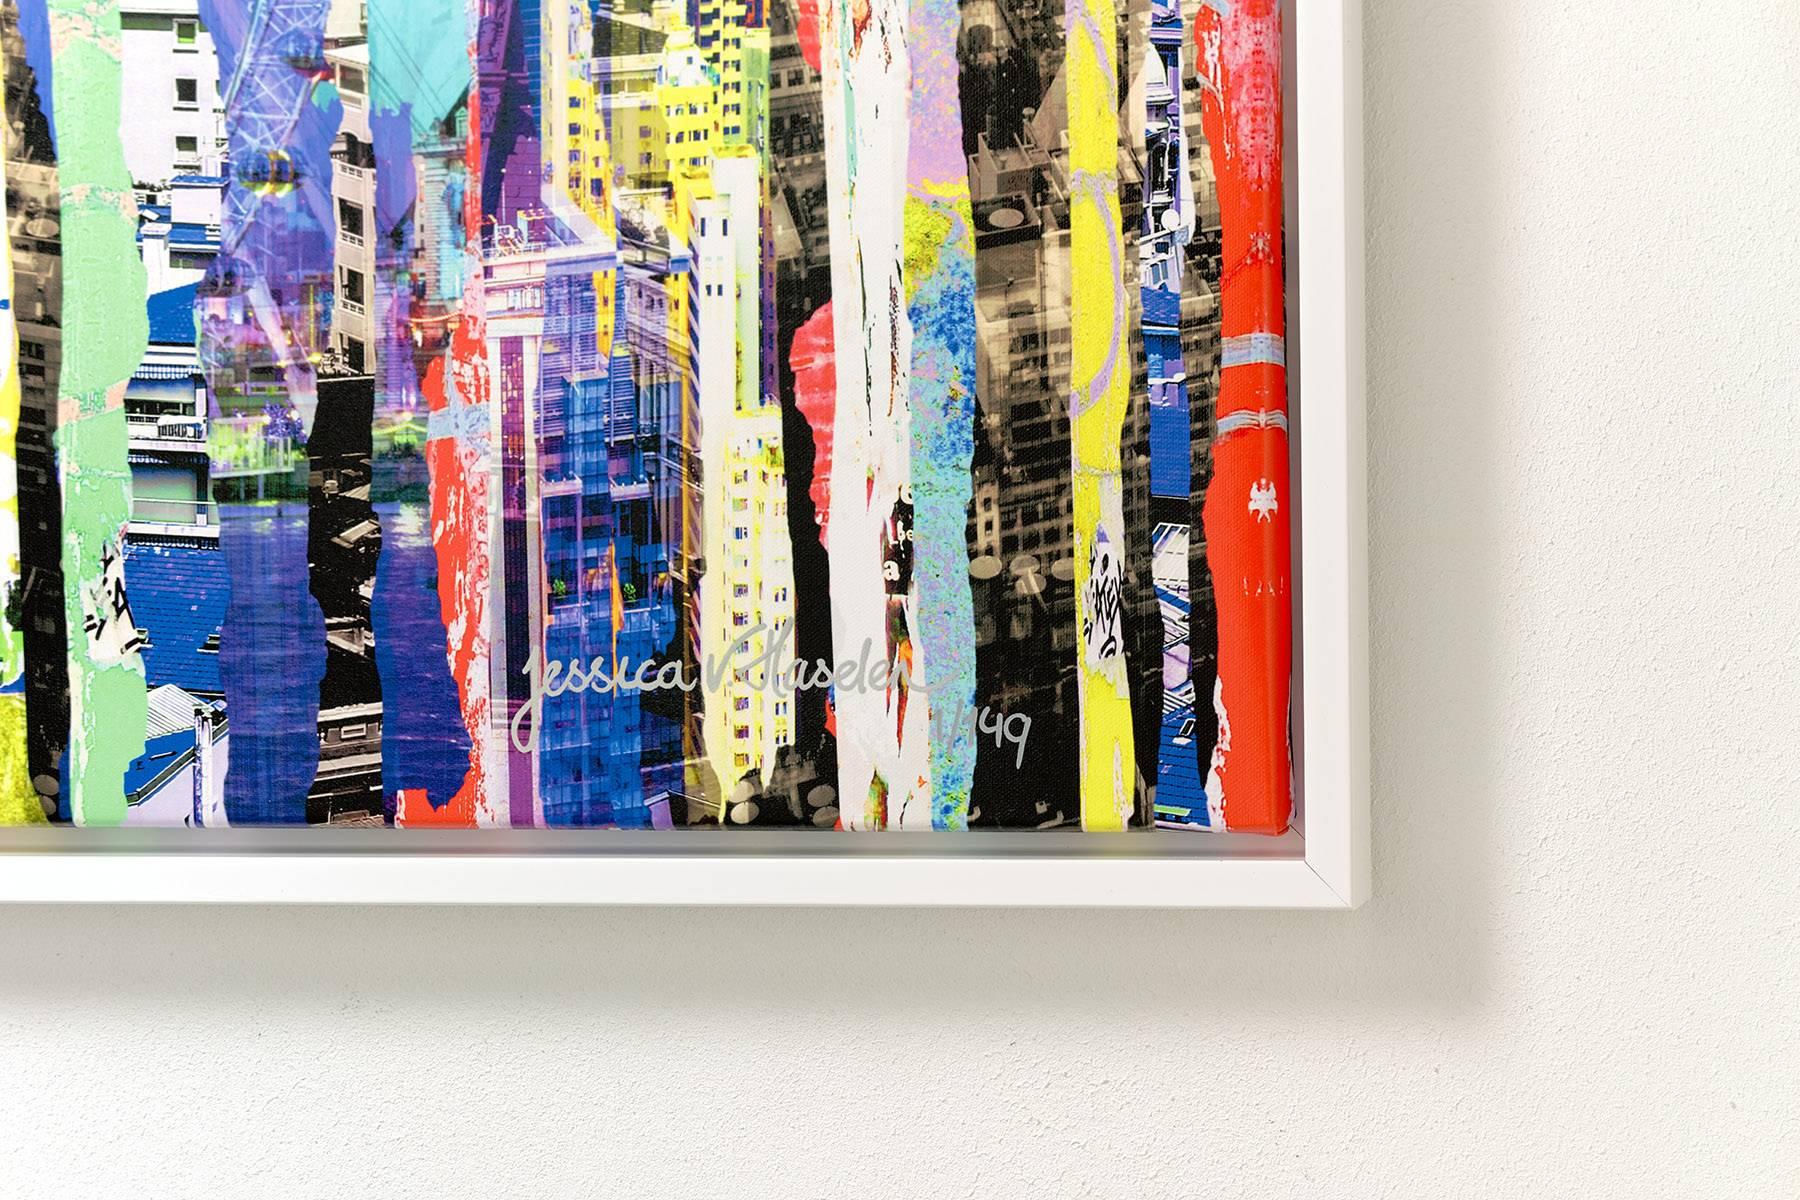 Shreds Of City I - Framed Fine Art Limited Edition of 149 - Silver Abstract Photograph by Jessica van Haselen